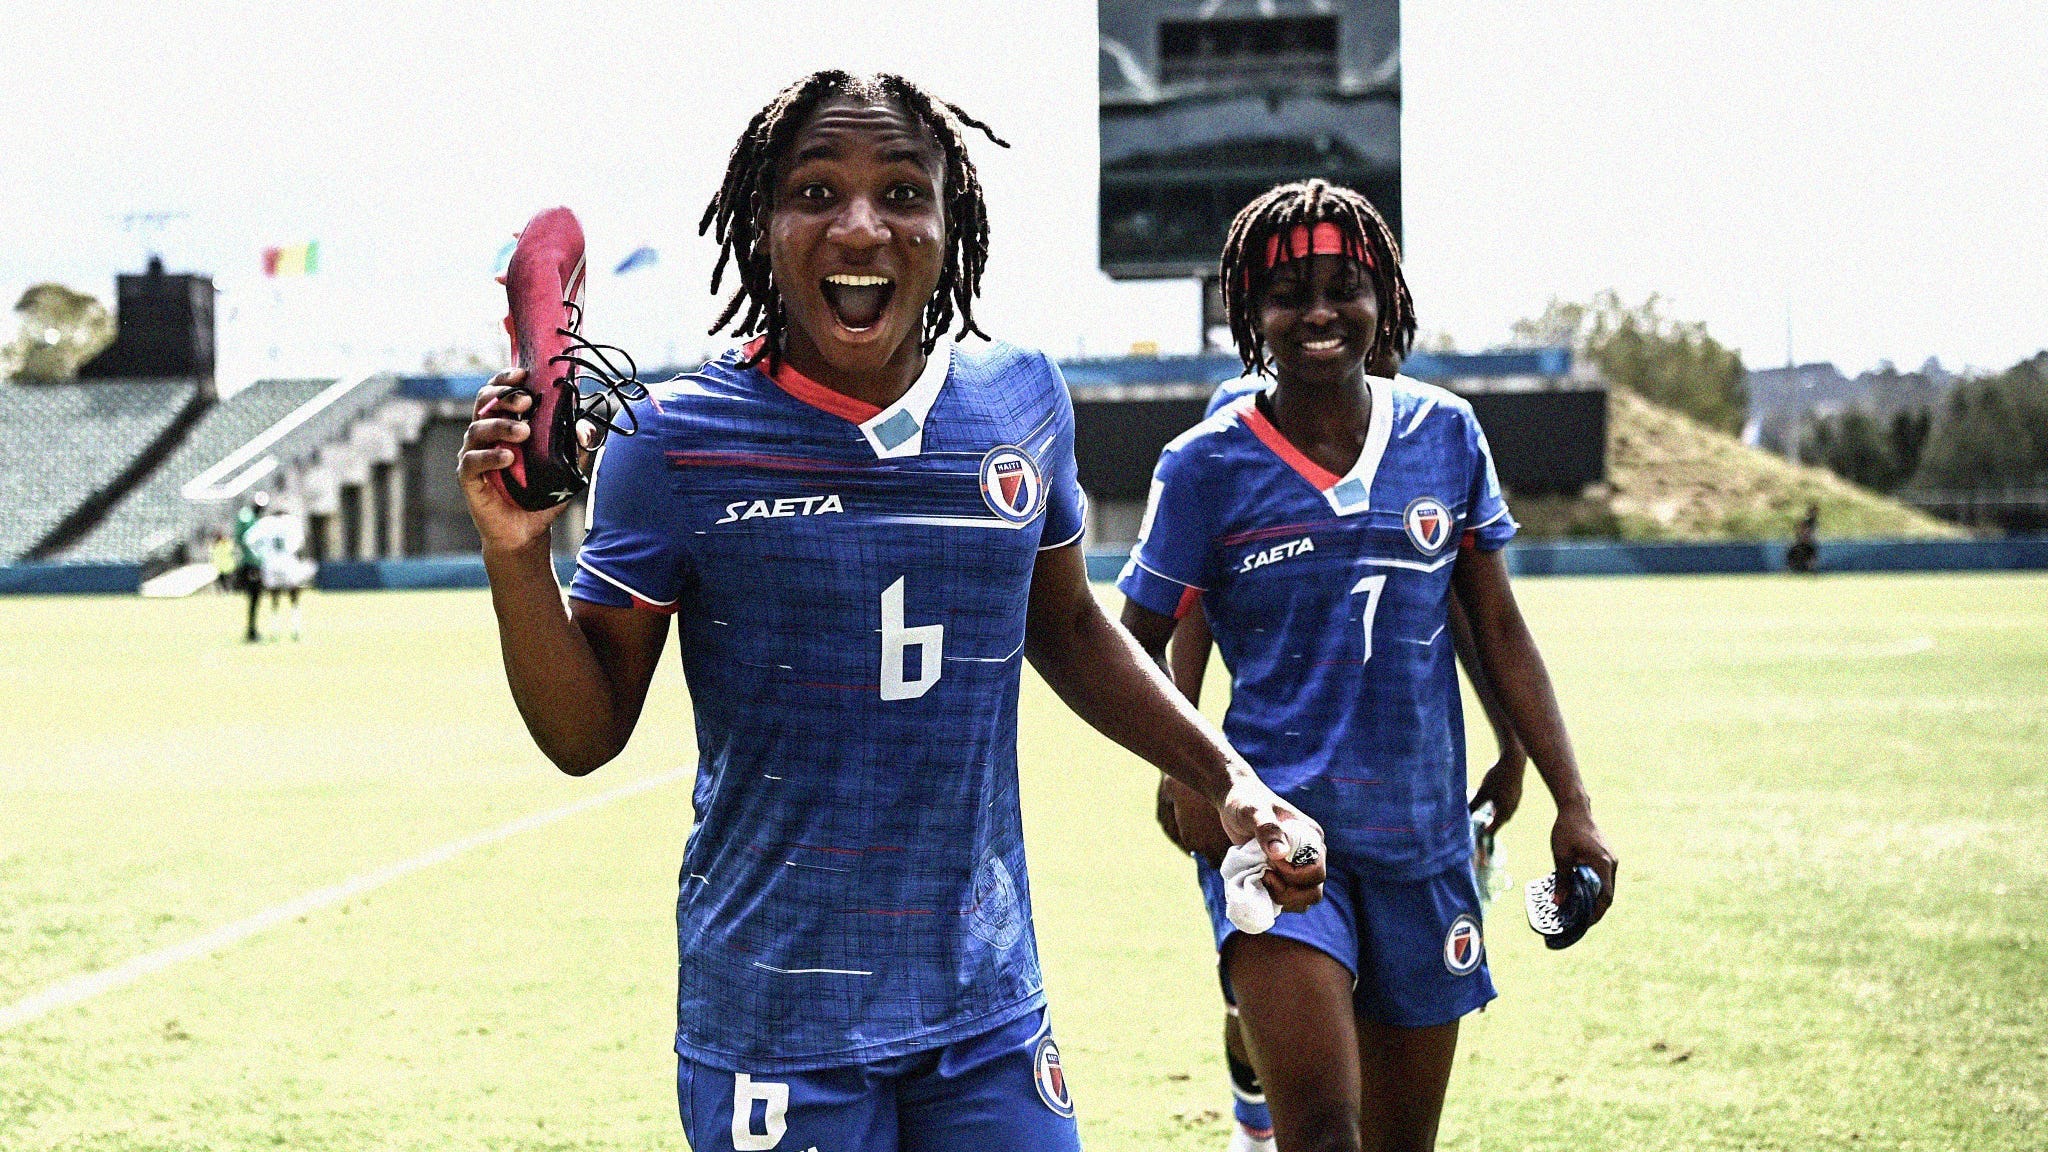 A photo of Haiti's Melchie Dumornay smiling at the camera while holding a pink boot in her right hand